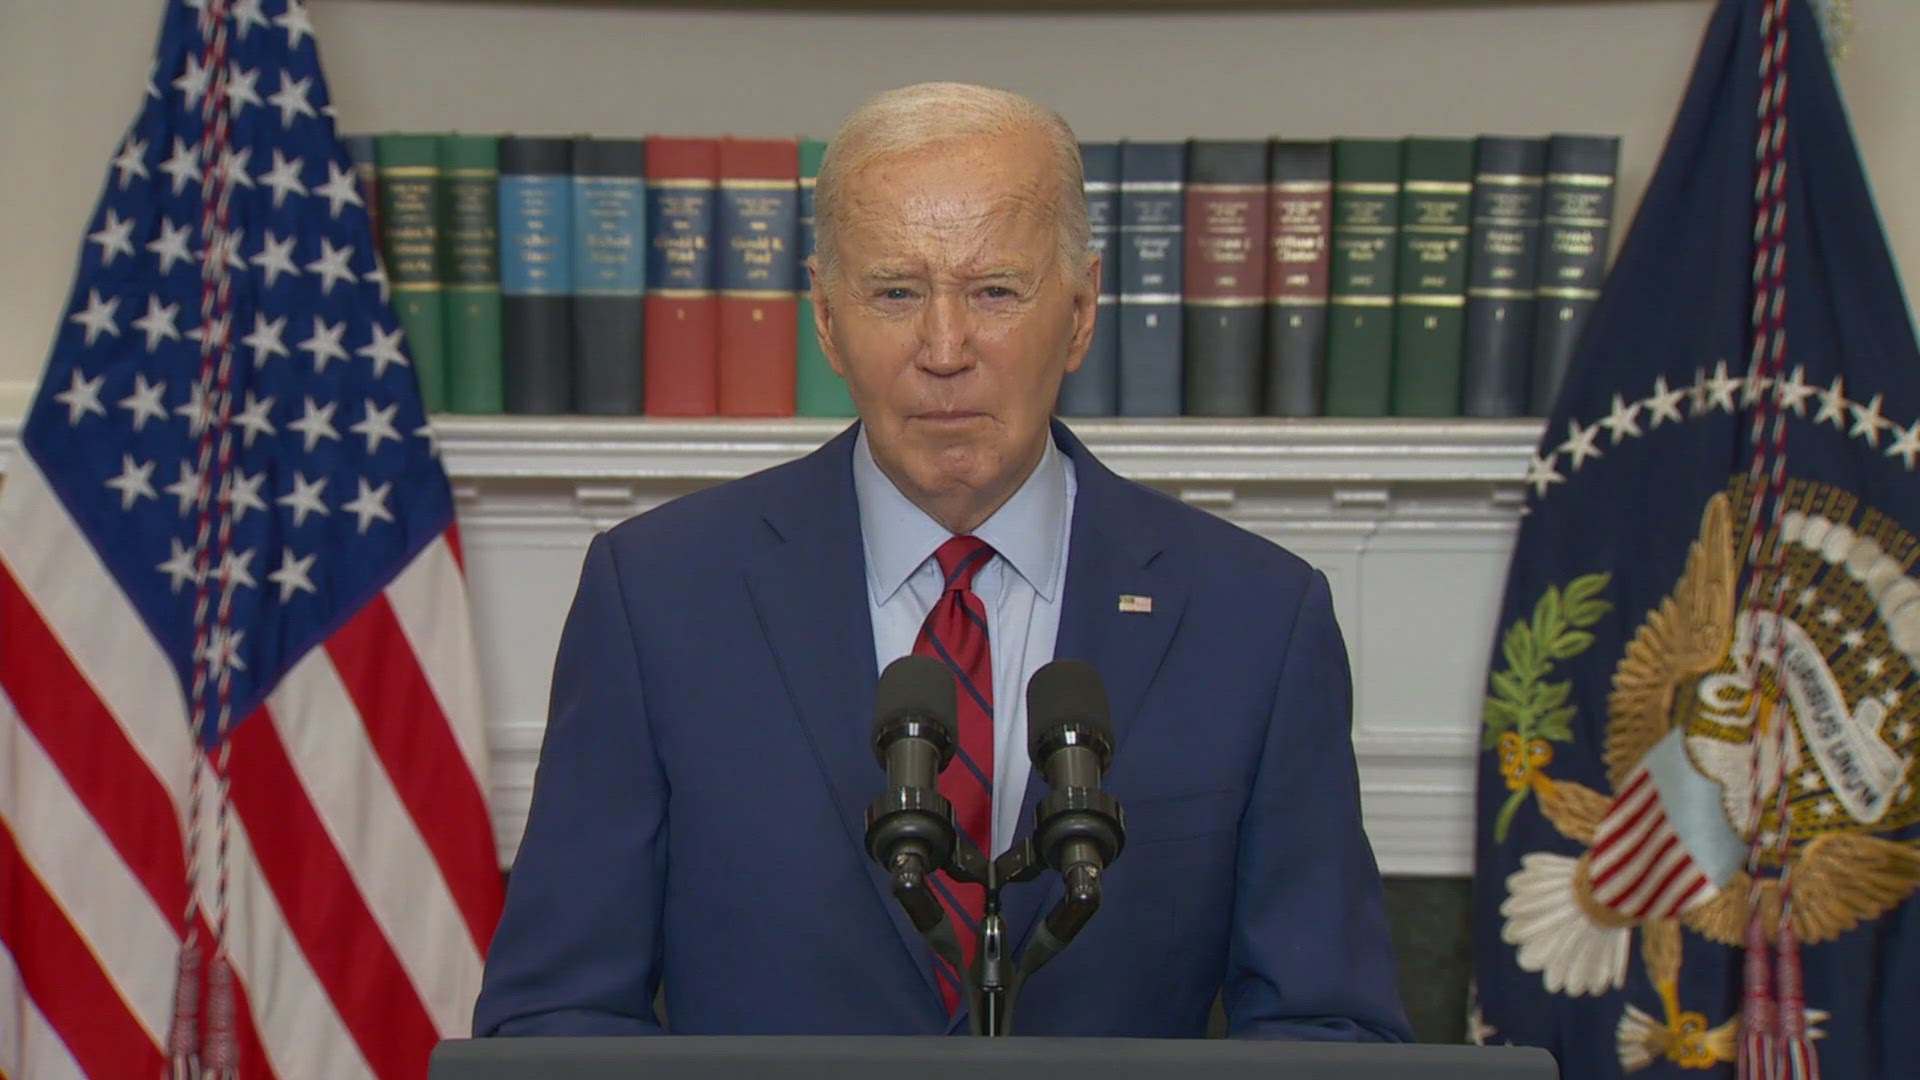 By focusing on a law-and-order message while defending the right to free speech, Biden is grasping for a middle ground on an intensely divisive issue.